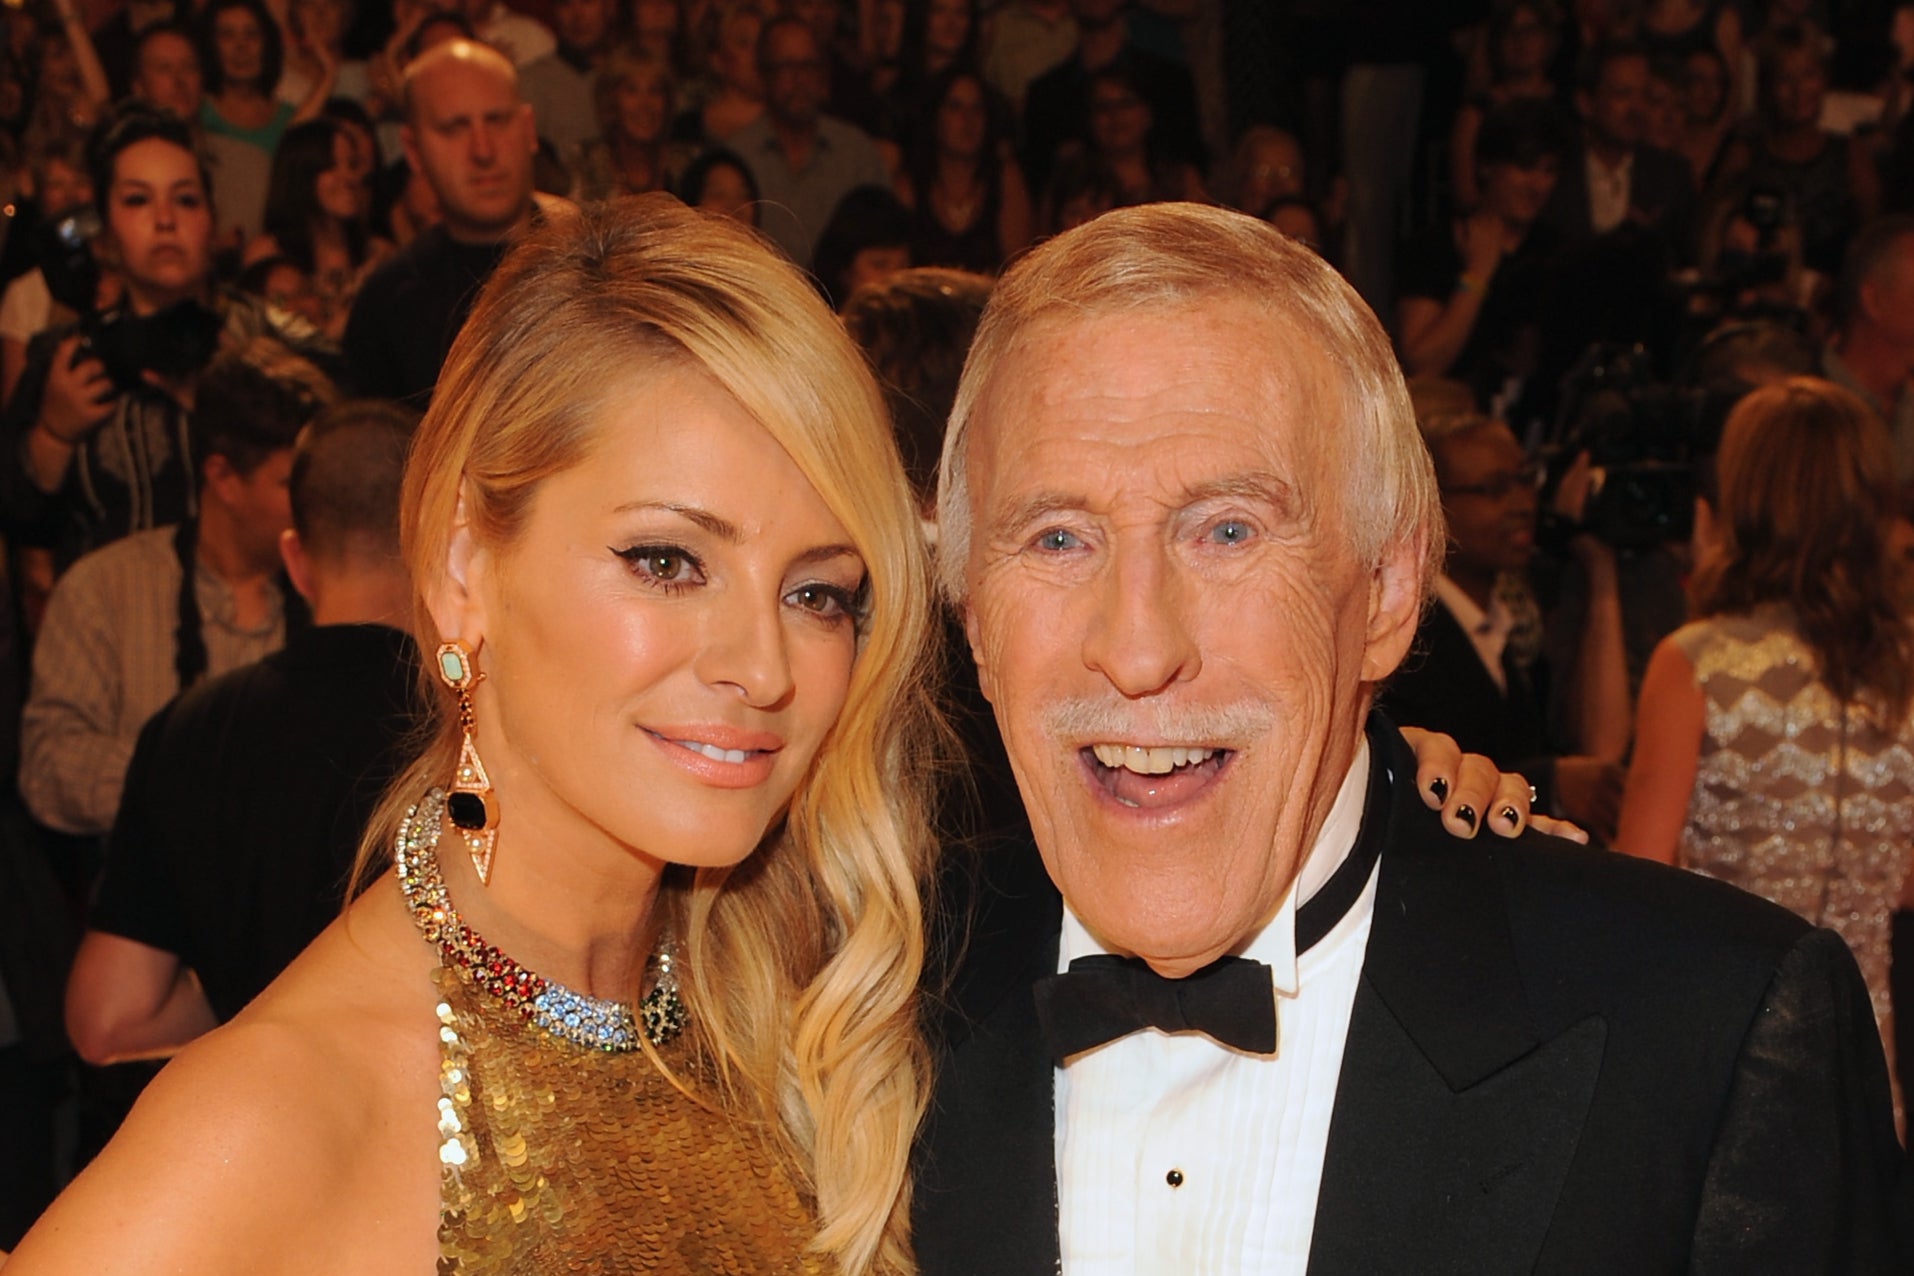 Keep Dancing: Original ‘Strictly’ presenters, Tess Daly and the late Bruce Forsyth